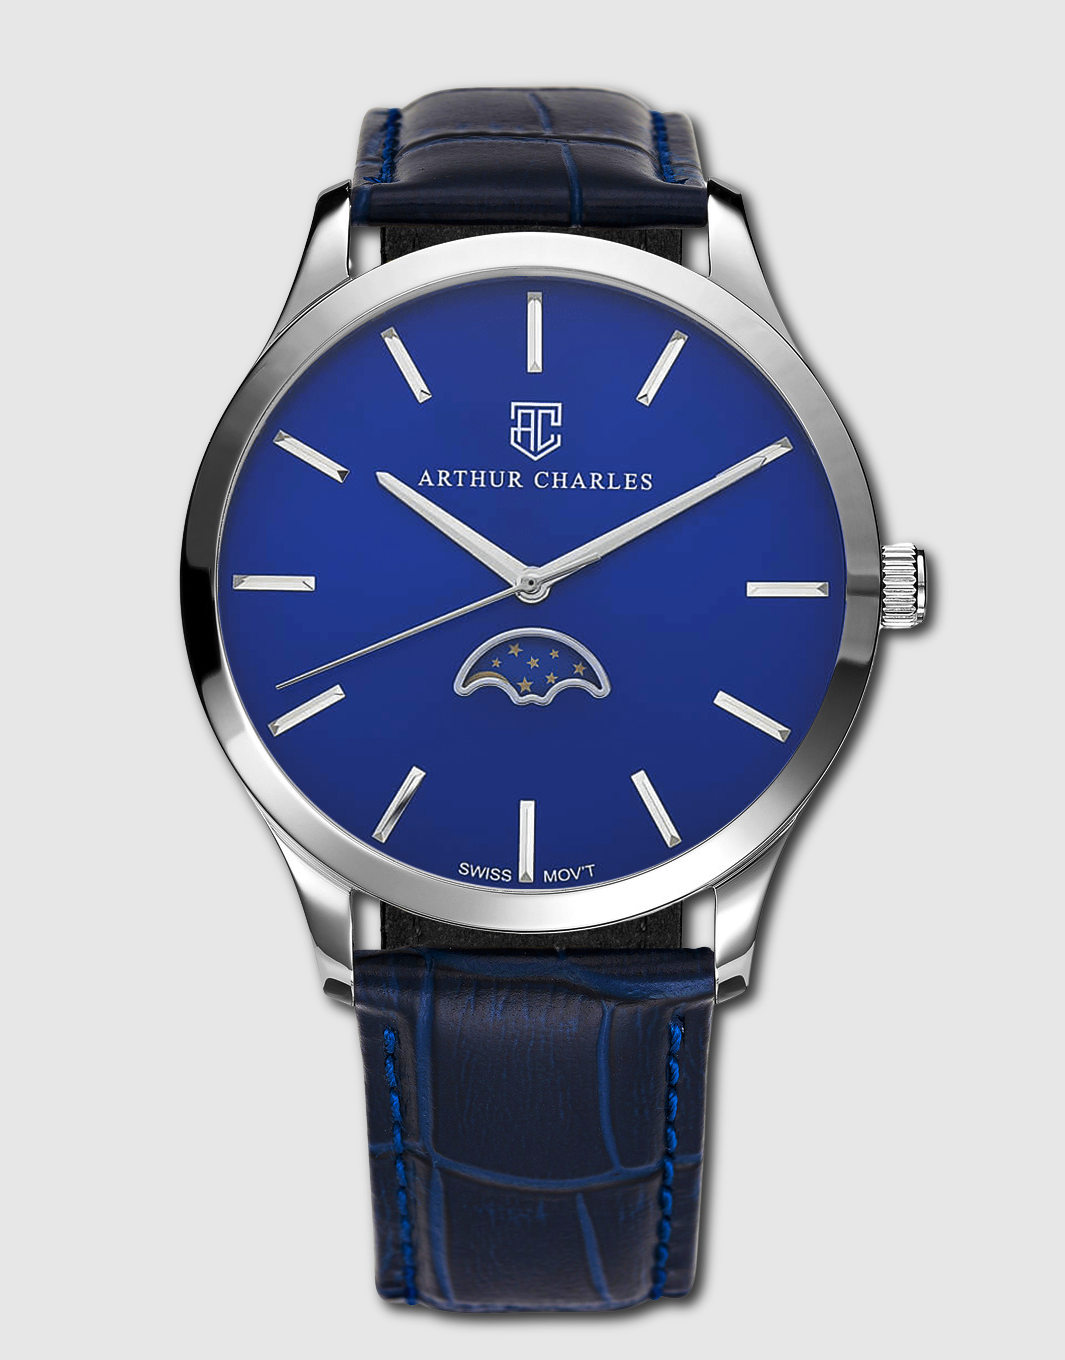 Front view of the Blue Moonphase Watch sold by Arthur Charles Watches. This watch has a blue leather butterfly clasp strap and blue dial with silver hands and indices. This watch features a moonphase indicator and also uses swiss movement.